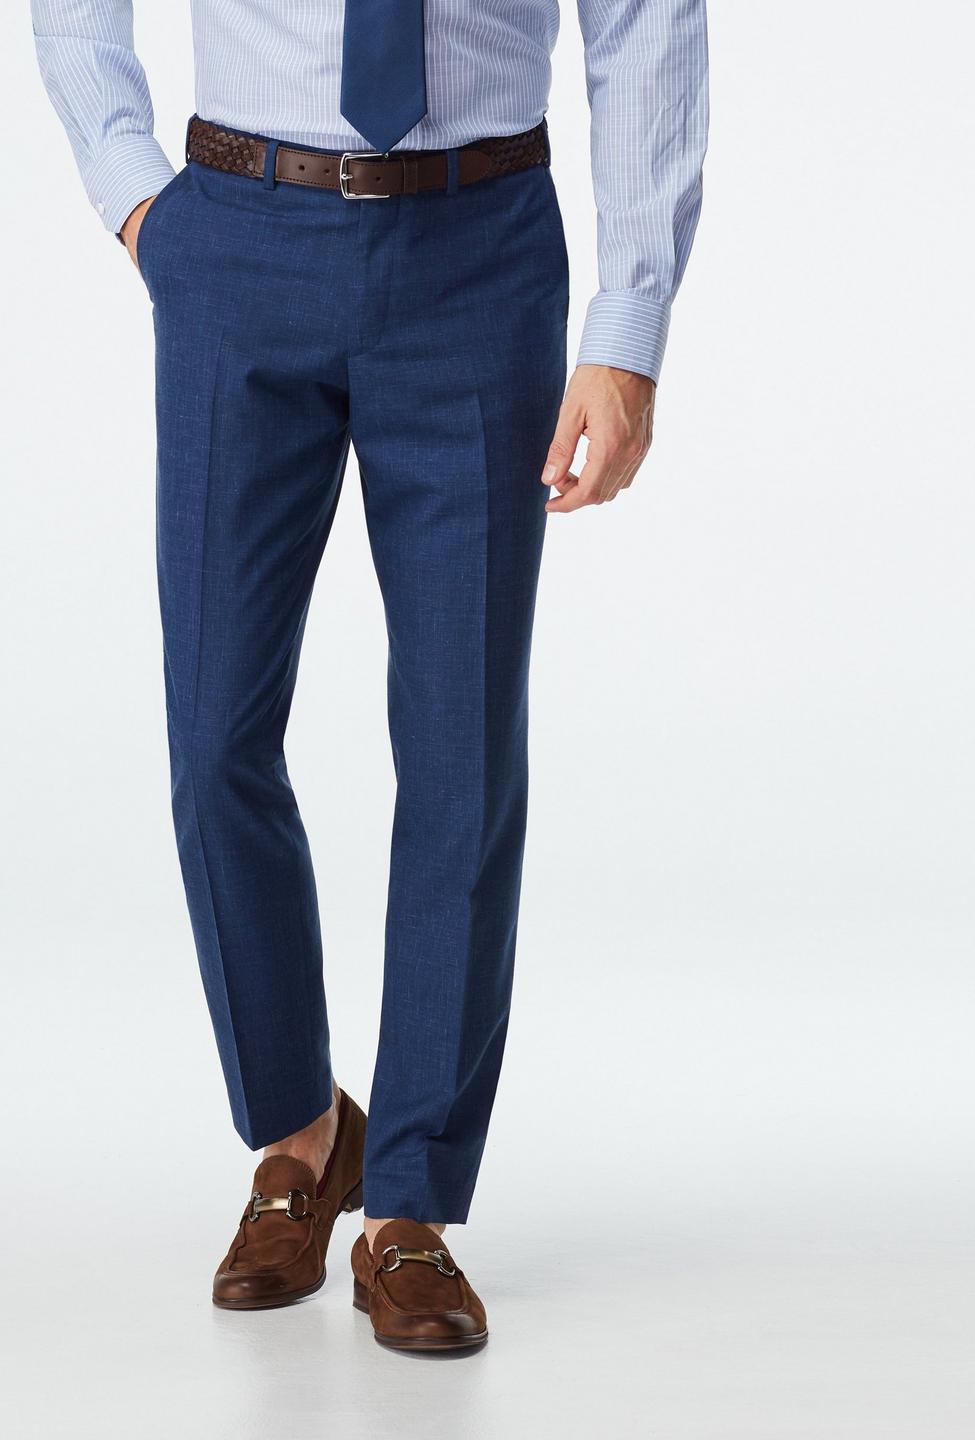 Blue pants - Stockport Solid Design from Seasonal Indochino Collection